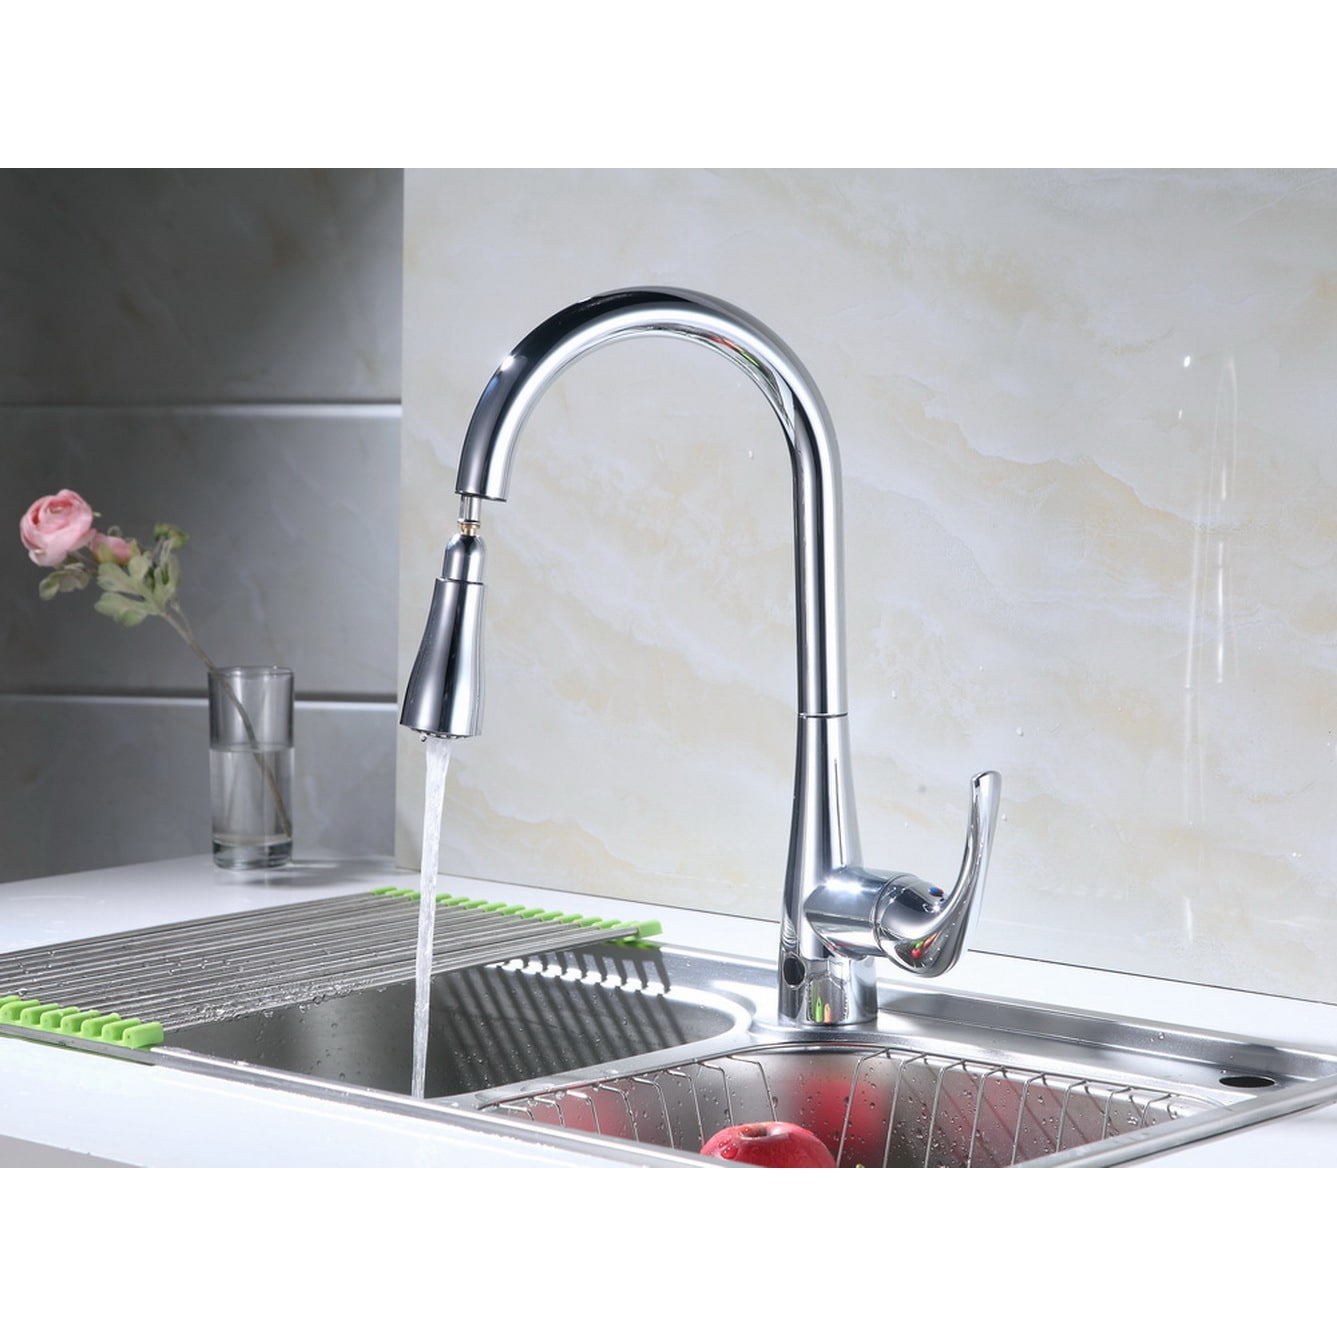 RUNFINE Single-Handle Pull-Down Sprayer With Hands-Free Kitchen Faucet Chrome - image 5 of 5